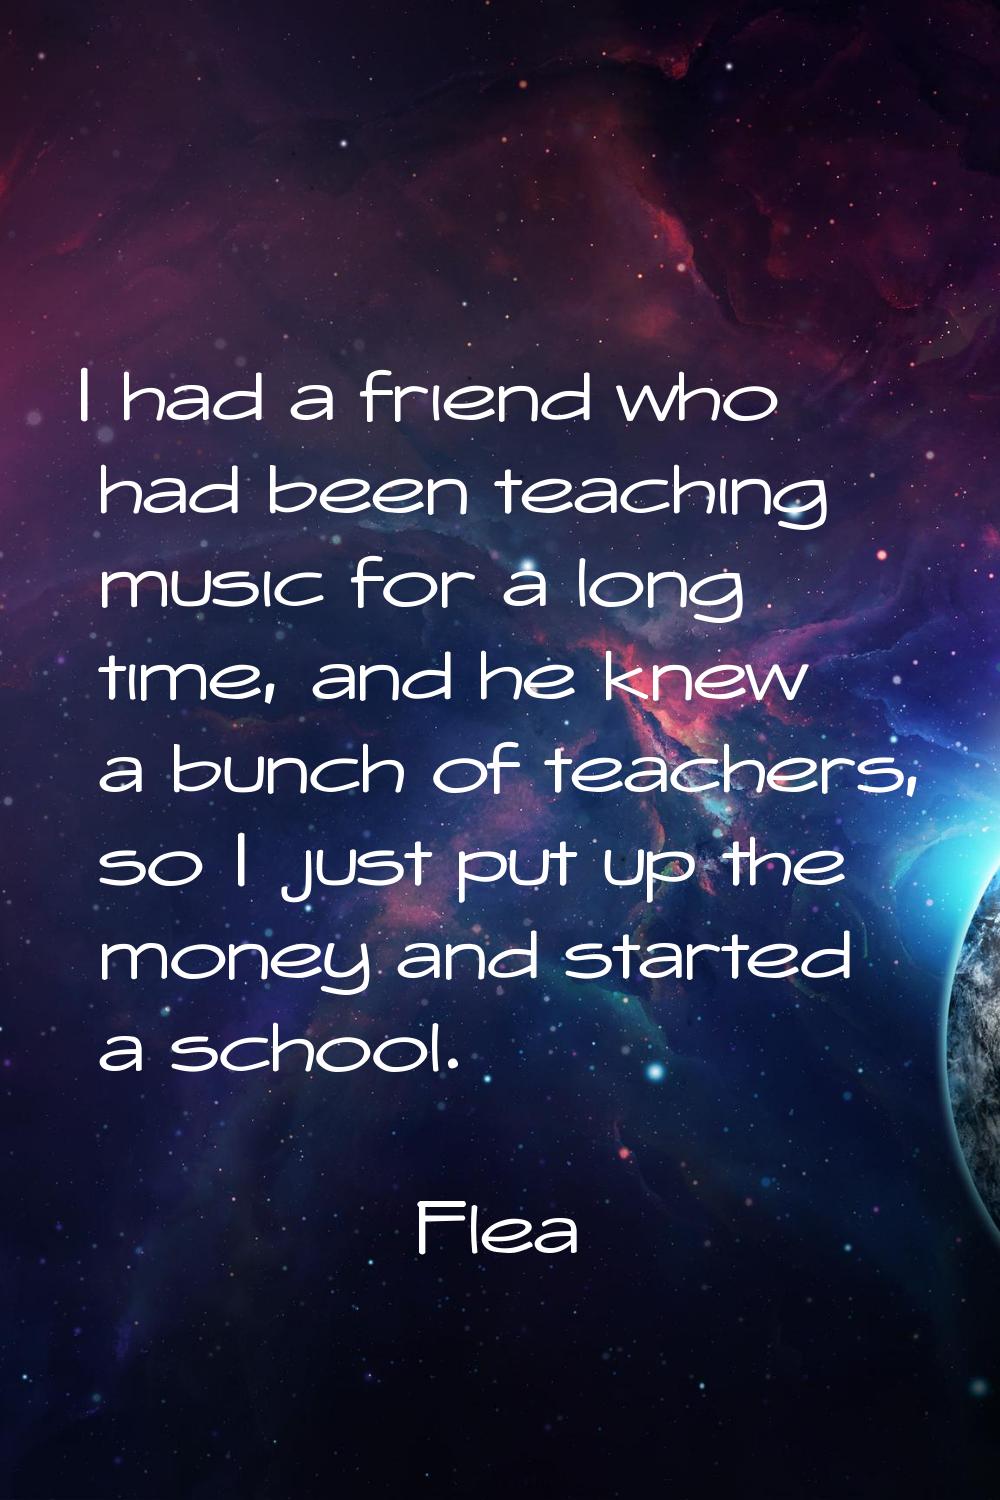 I had a friend who had been teaching music for a long time, and he knew a bunch of teachers, so I j